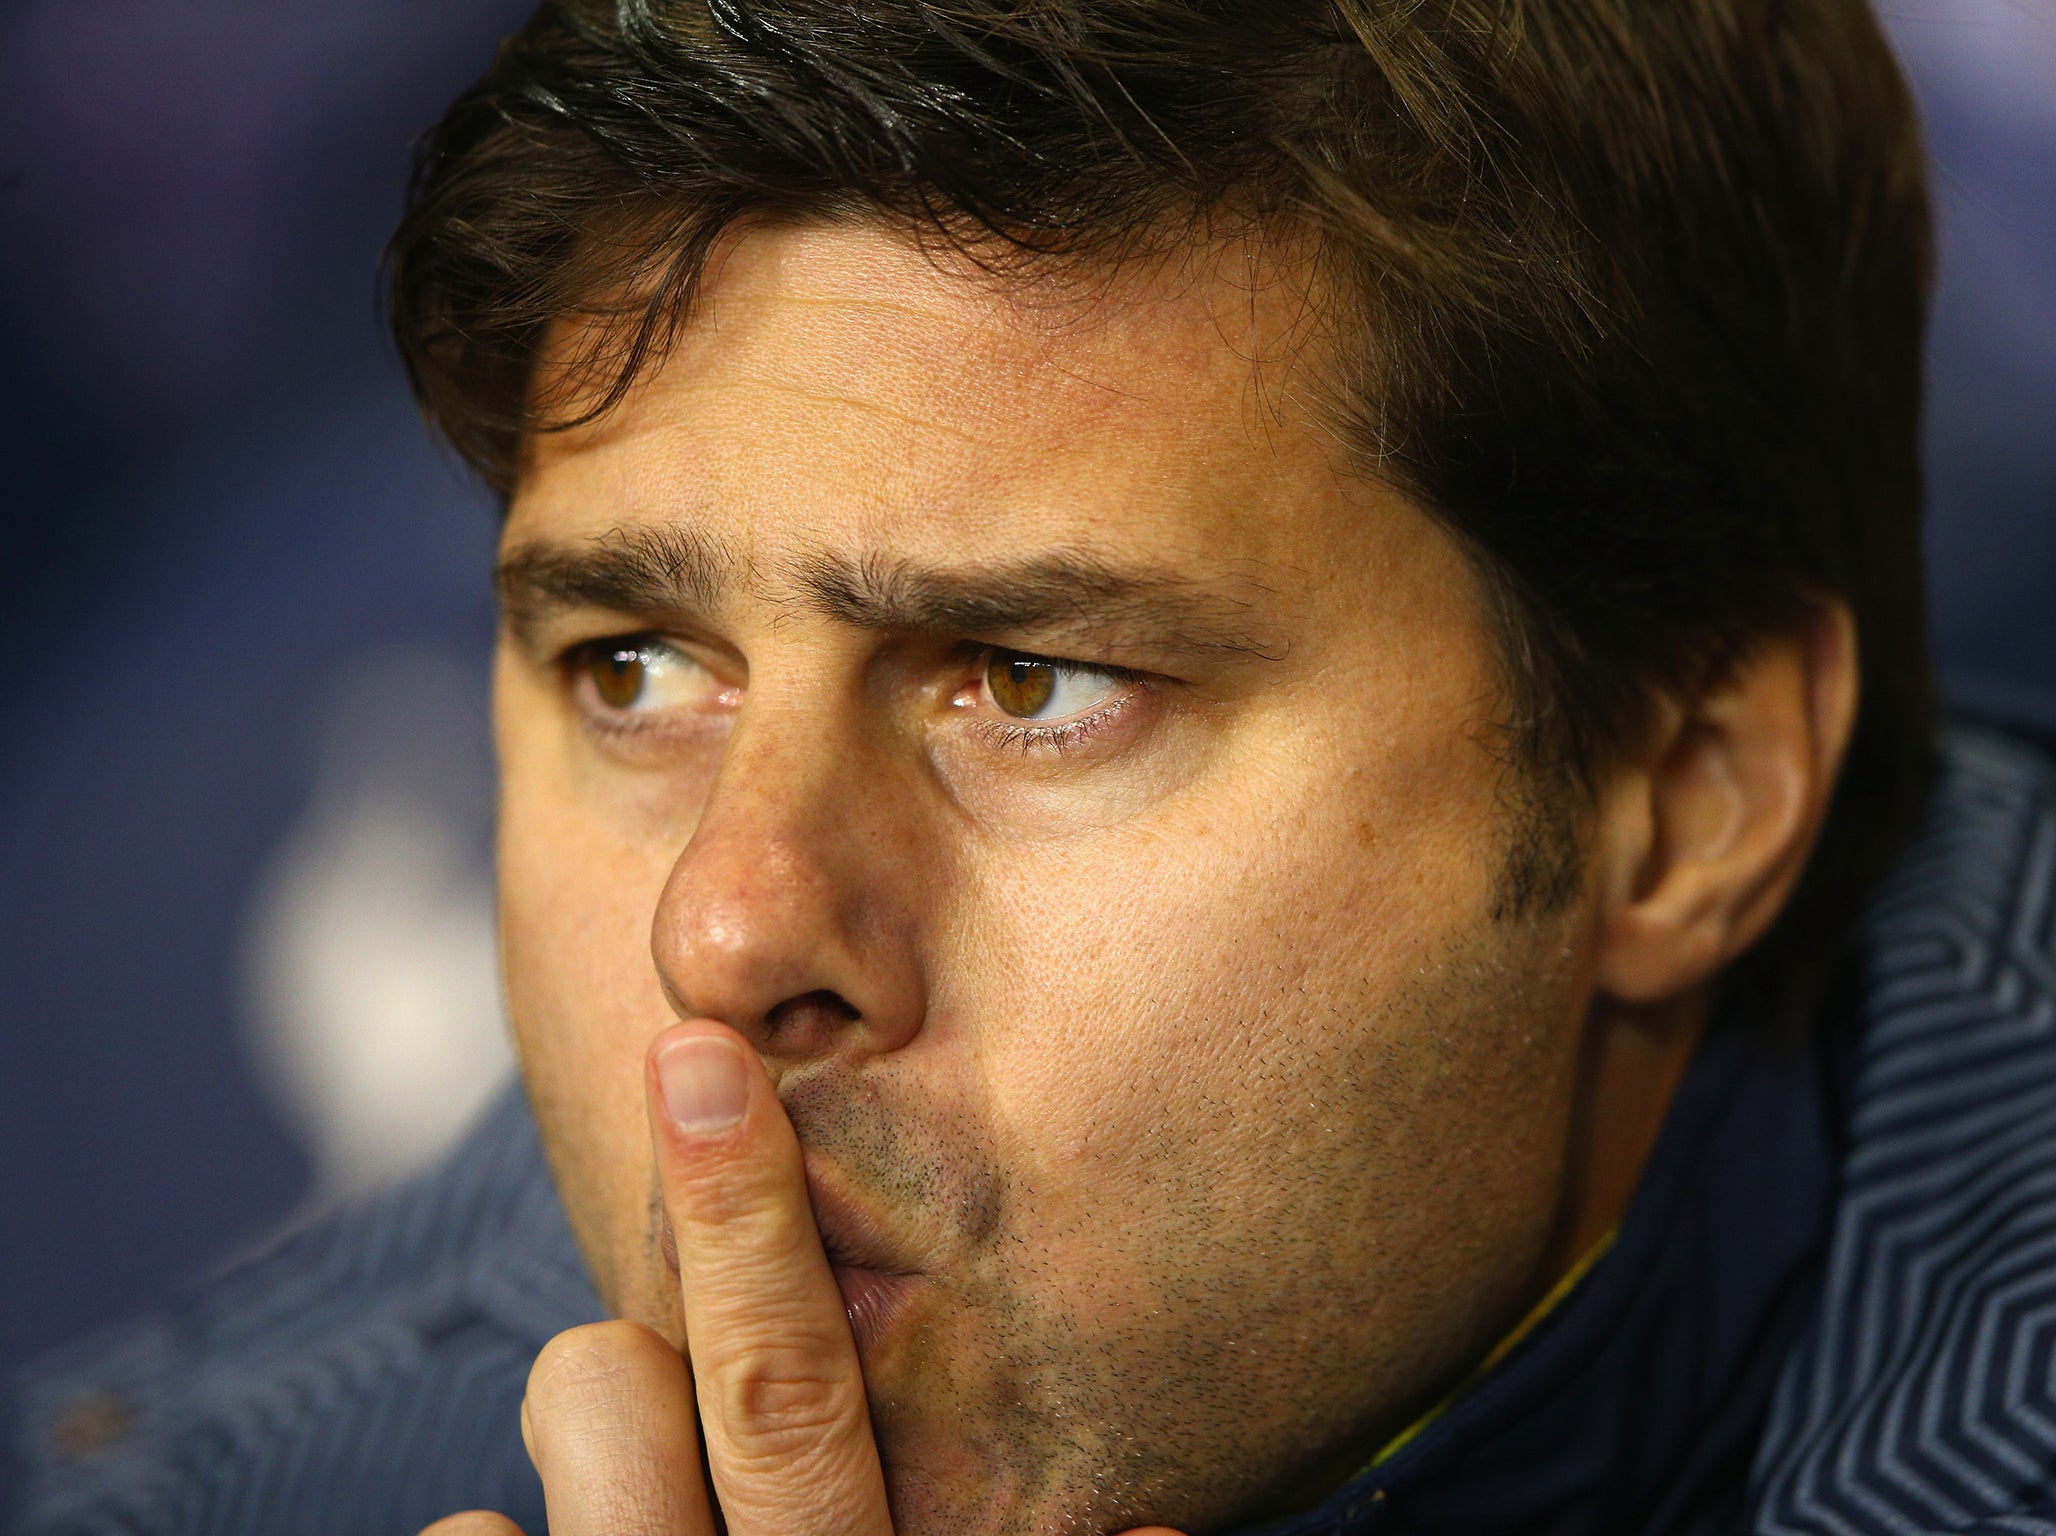 Naturally Pochettino would rather Spurs were winning, but if not, he wants to make the most of the situation